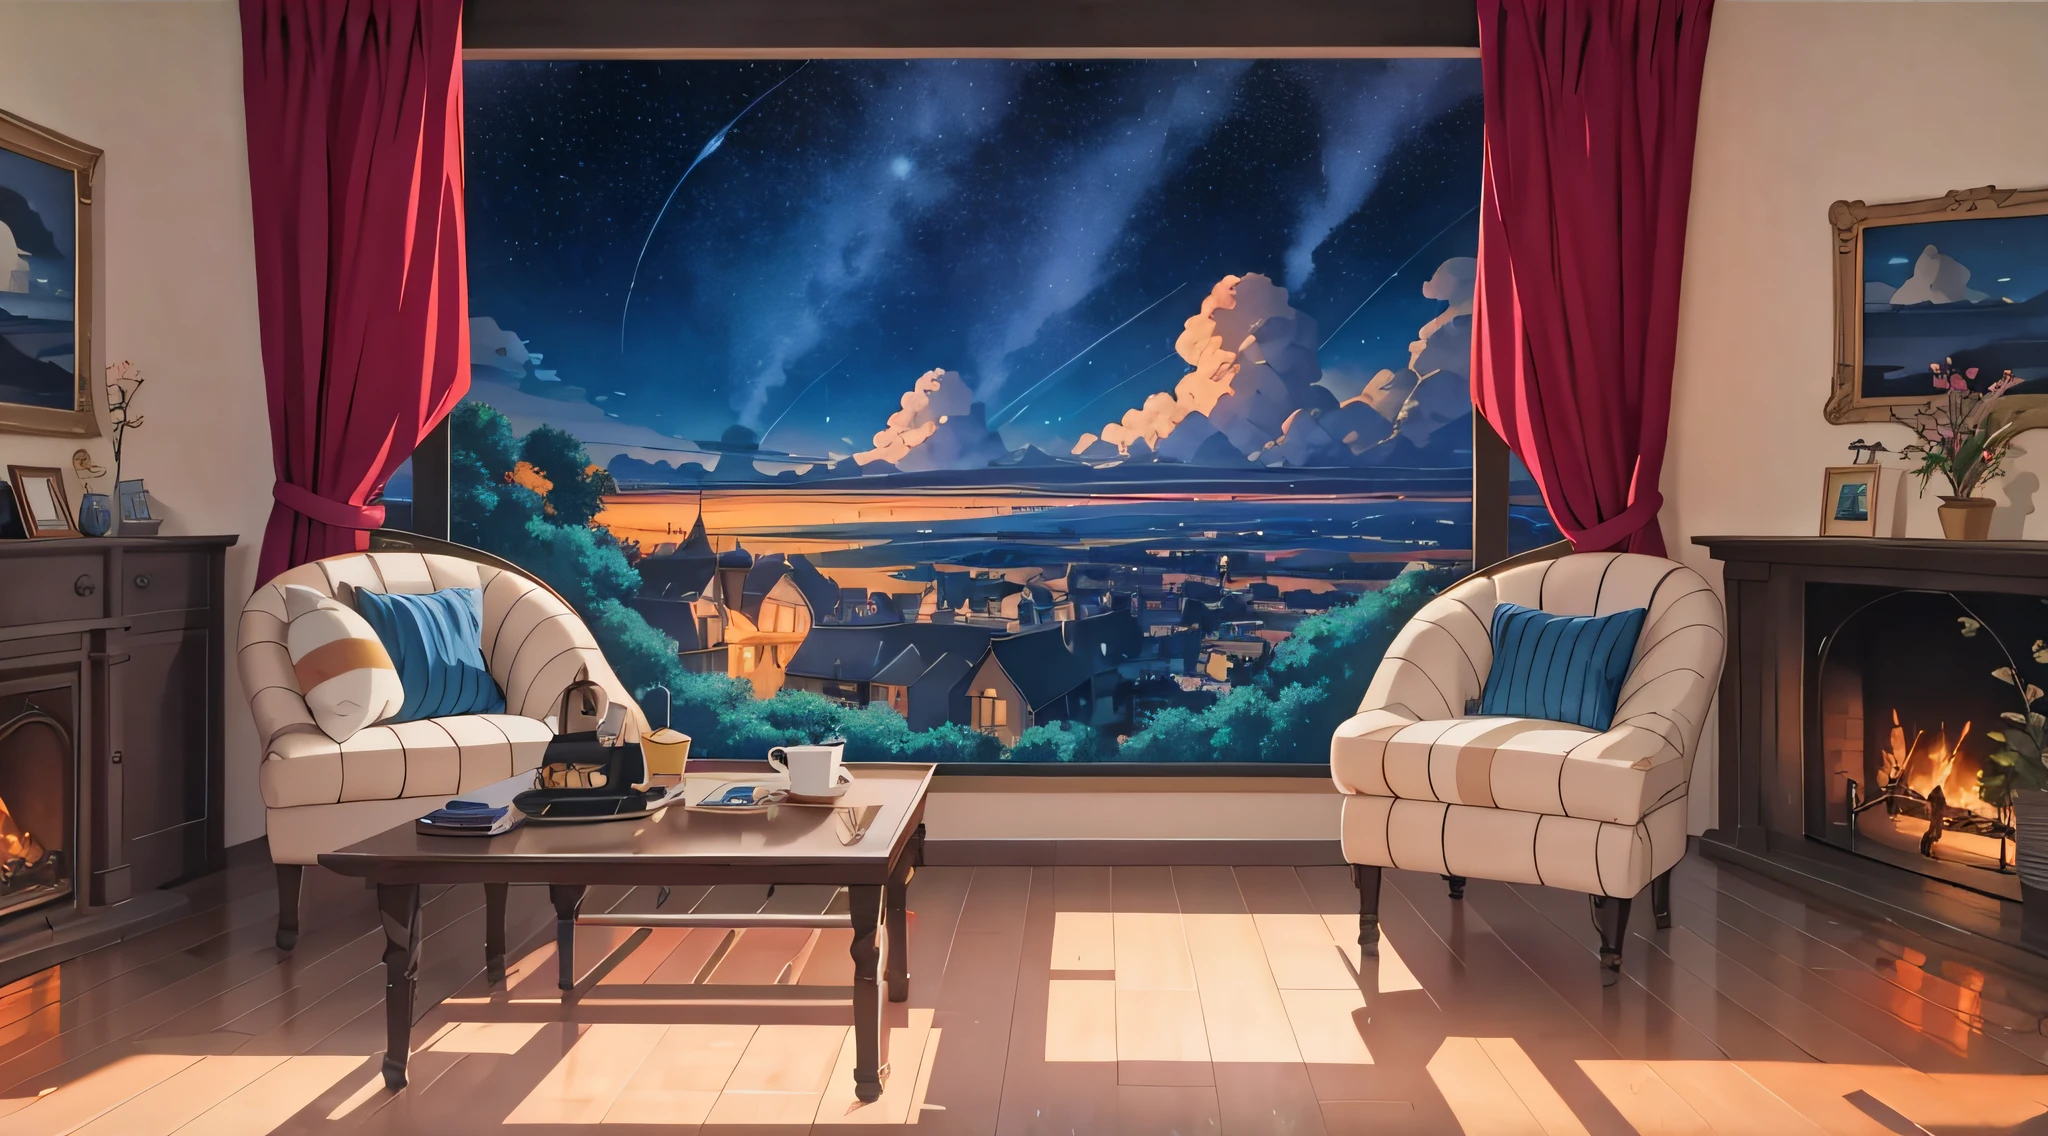 Photo of room with fireplace, Relaxing concept art, Anime background art, Arte conceitual de inverno, Personal room background, anime backgrounds, Anime landscape concept art, Home page background, Starry sky environment in moonlight, beautful view, concept art magical highlight, cozy cafe background, Open window ib background, Anime beautiful peaceful scene, bedroom background，There are no personas